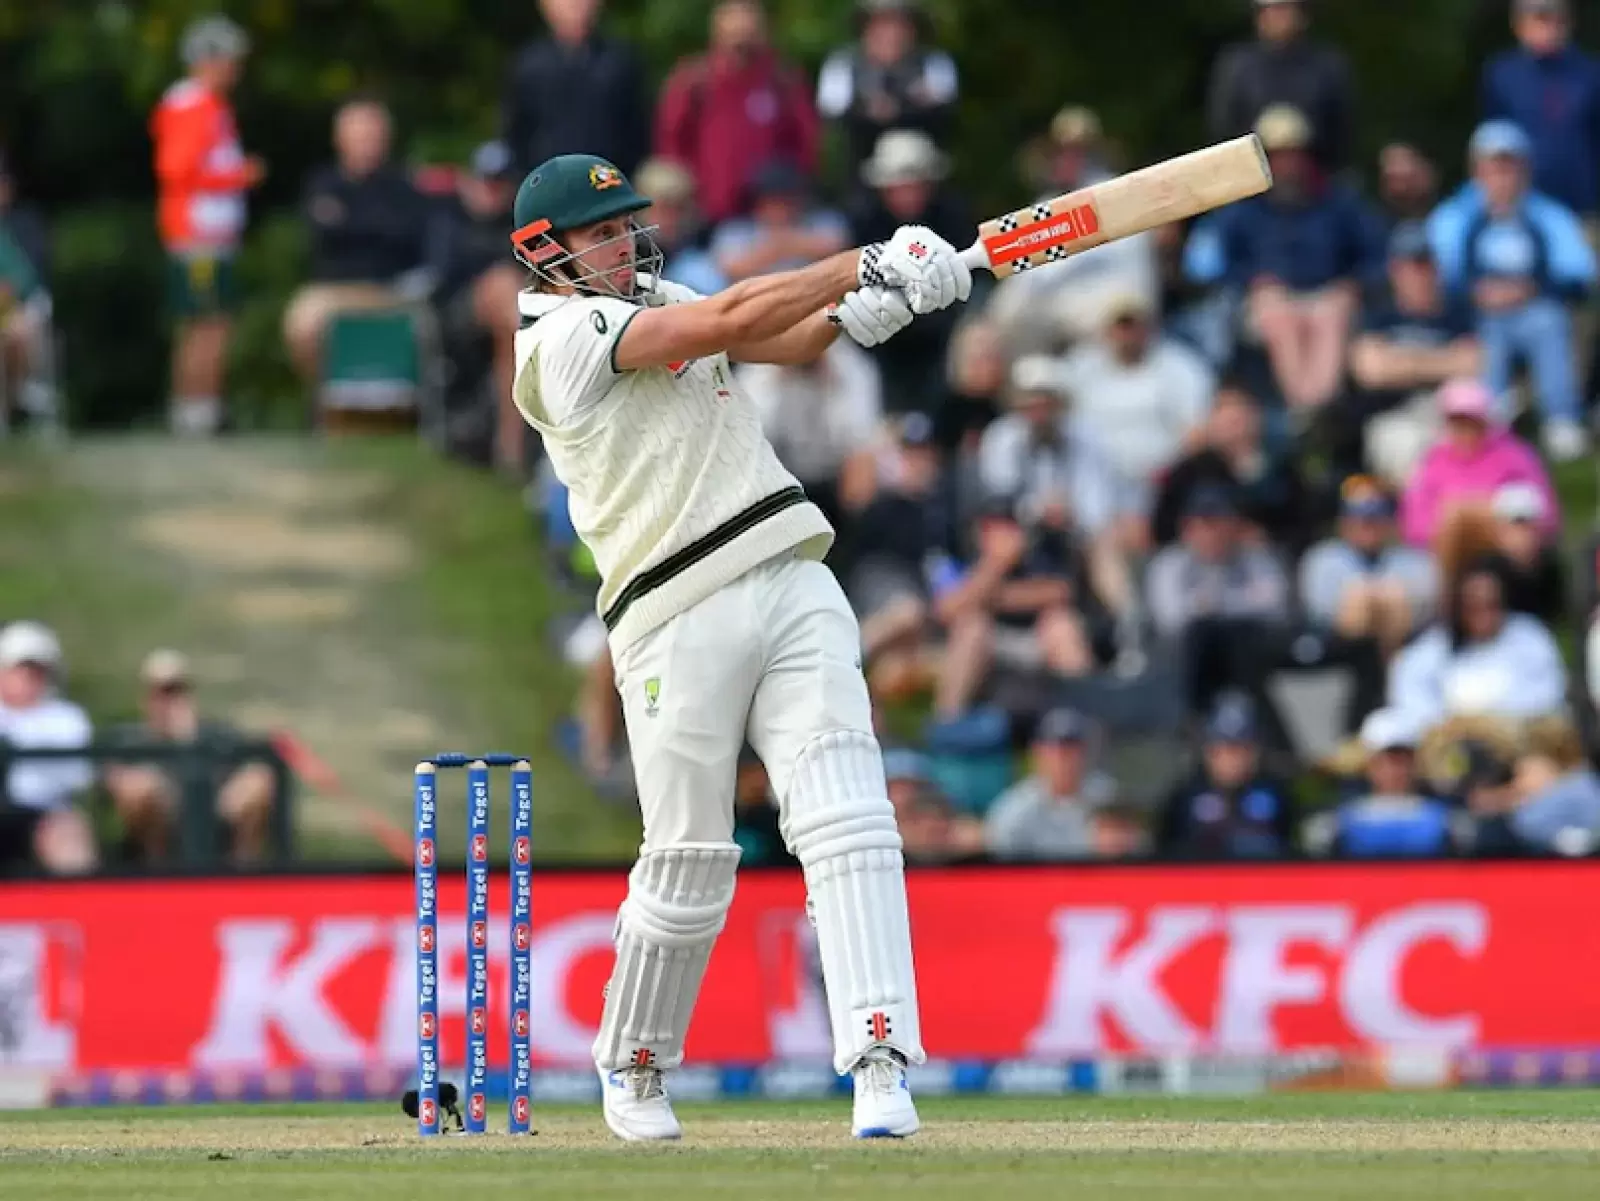 NZ vs AUS: Australia won Christchurch Test by 3 wickets, made a 2-0 clean sweep against New Zealand